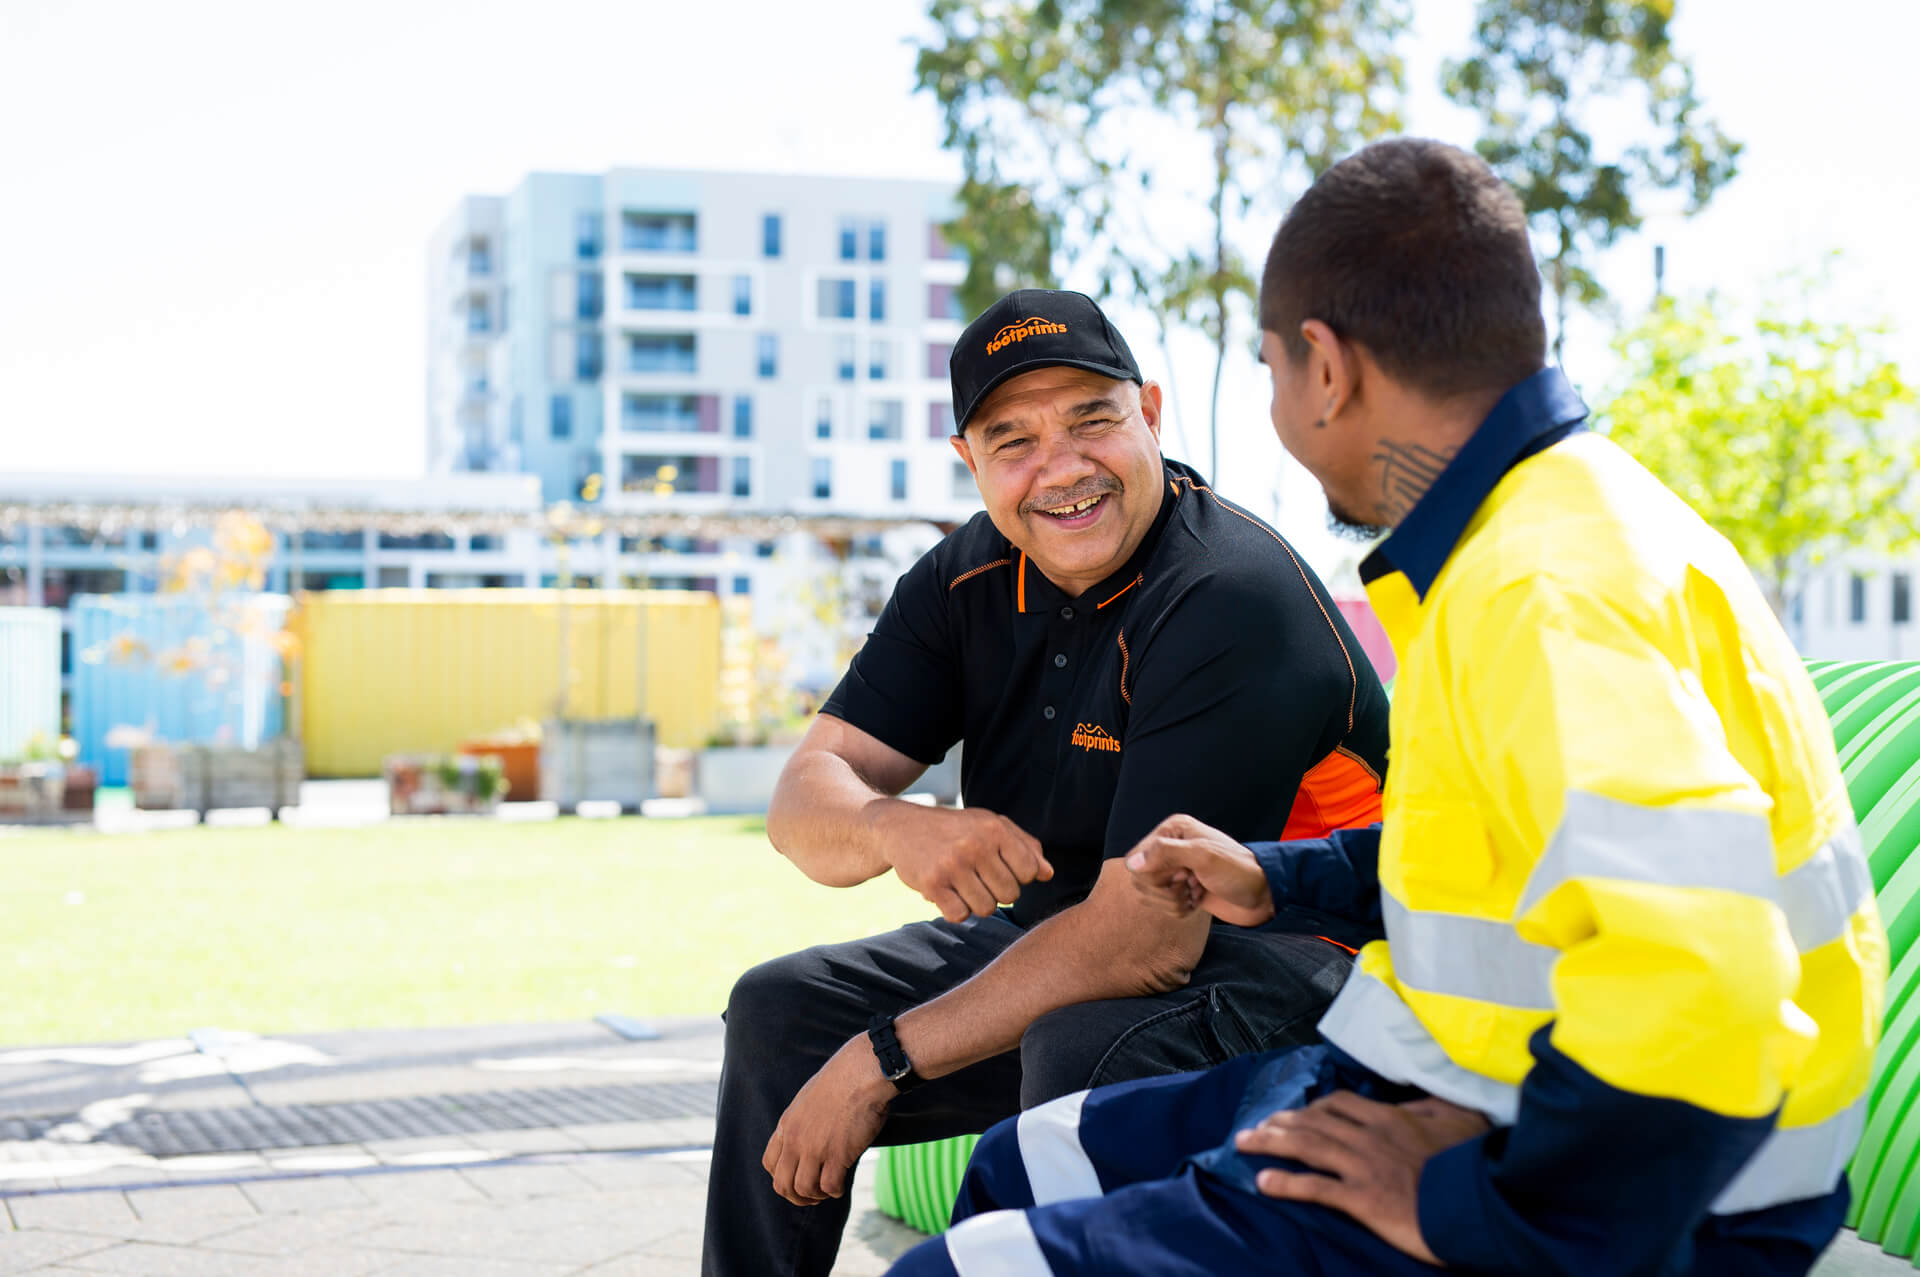 Older man smiles and talks to young worker in high-vis top